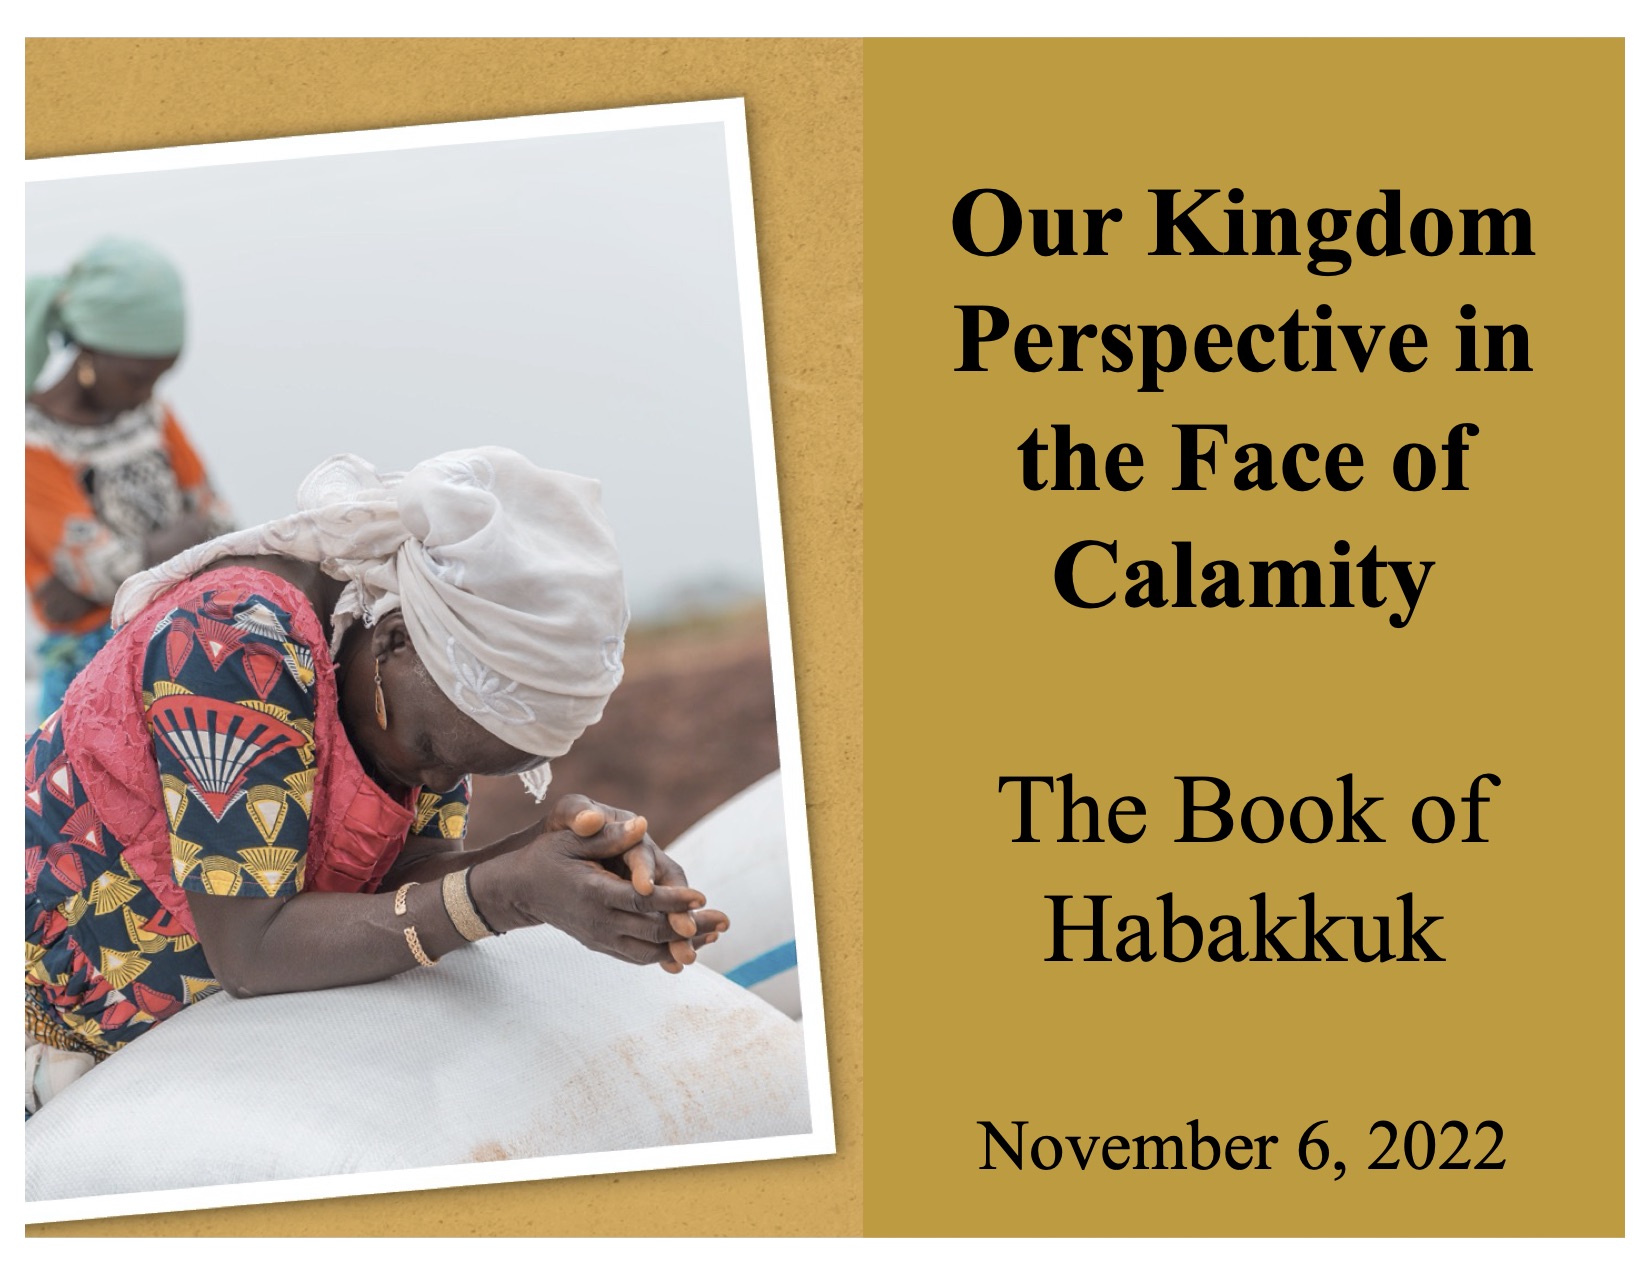 Our Kingdom Perspective in the Face of Calamity